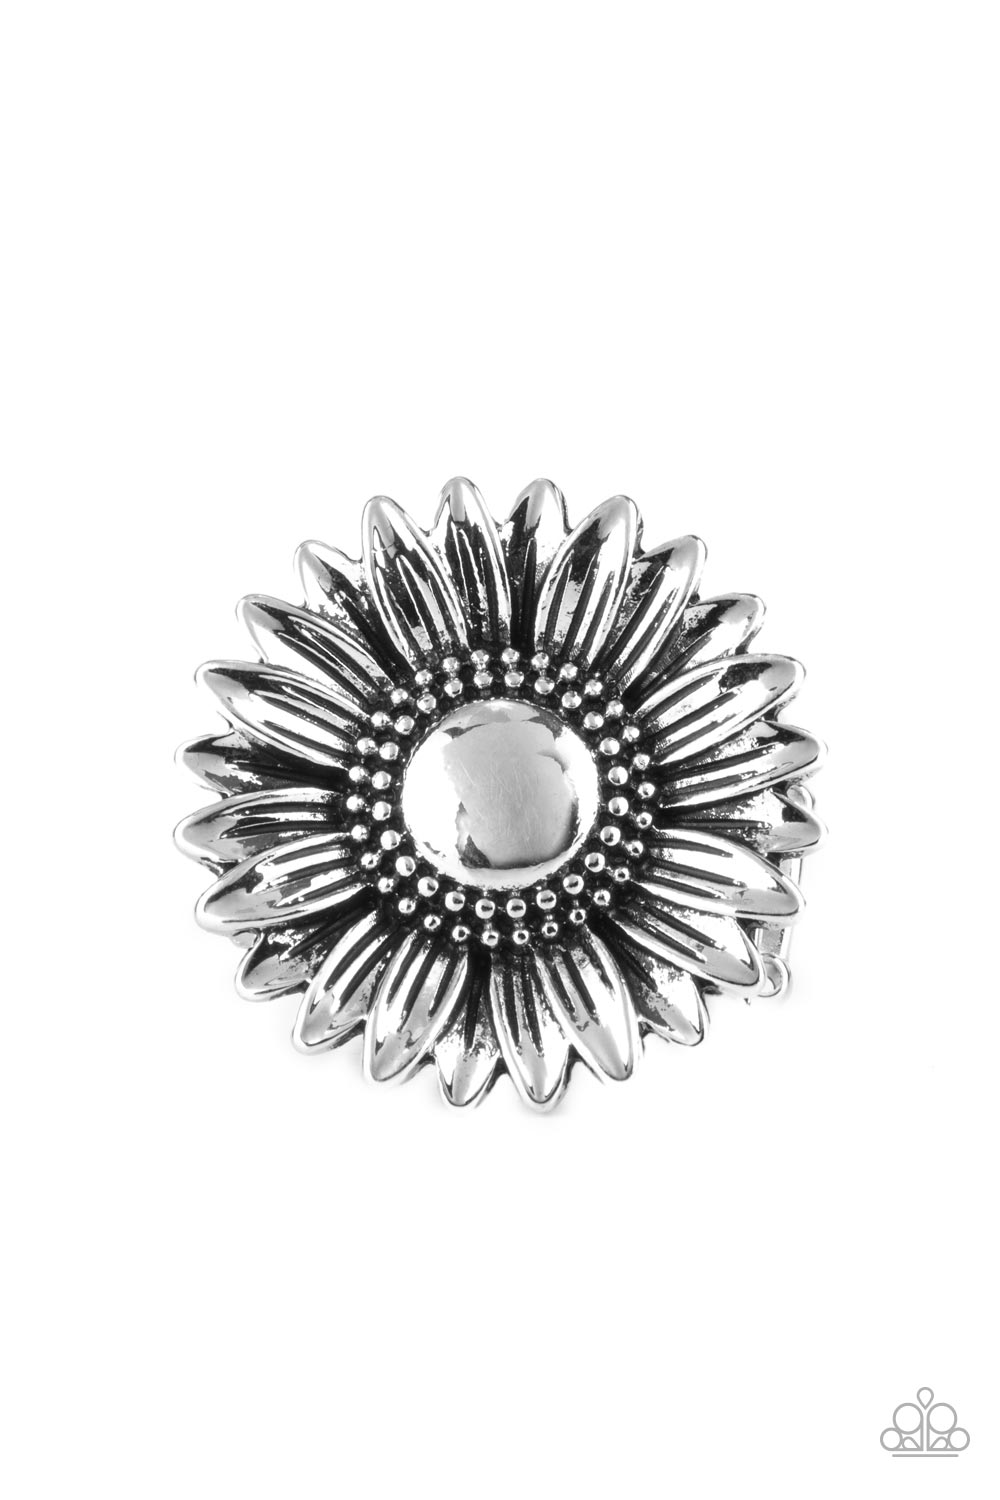 Farmstead Fashion Silver Ring - Paparazzi Accessories  Brushed in an antiqued finish, a rustic silver daisy blooms atop a decorative studded and embossed silver band for a simply seasonal look. Features a stretchy band for a flexible fit.  Sold as one individual ring.